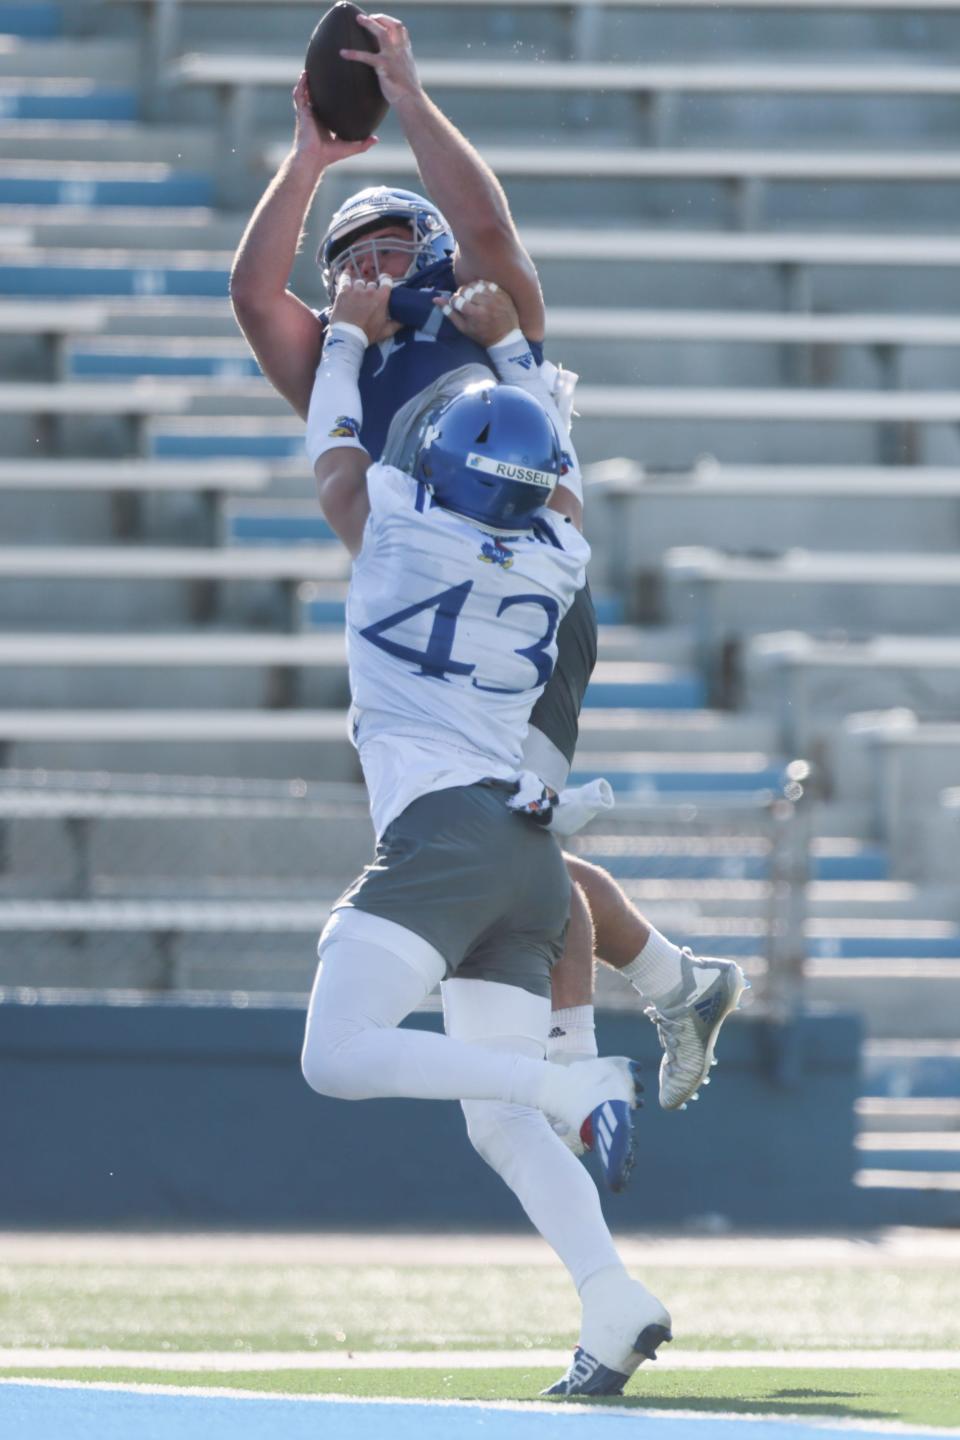 Kansas redshirt sophomore tight end Jared Casey (47) makes a catch over super-senior safety Andrew Russell (43) during a practice earlier this fall at David Booth Kansas Memorial Stadium